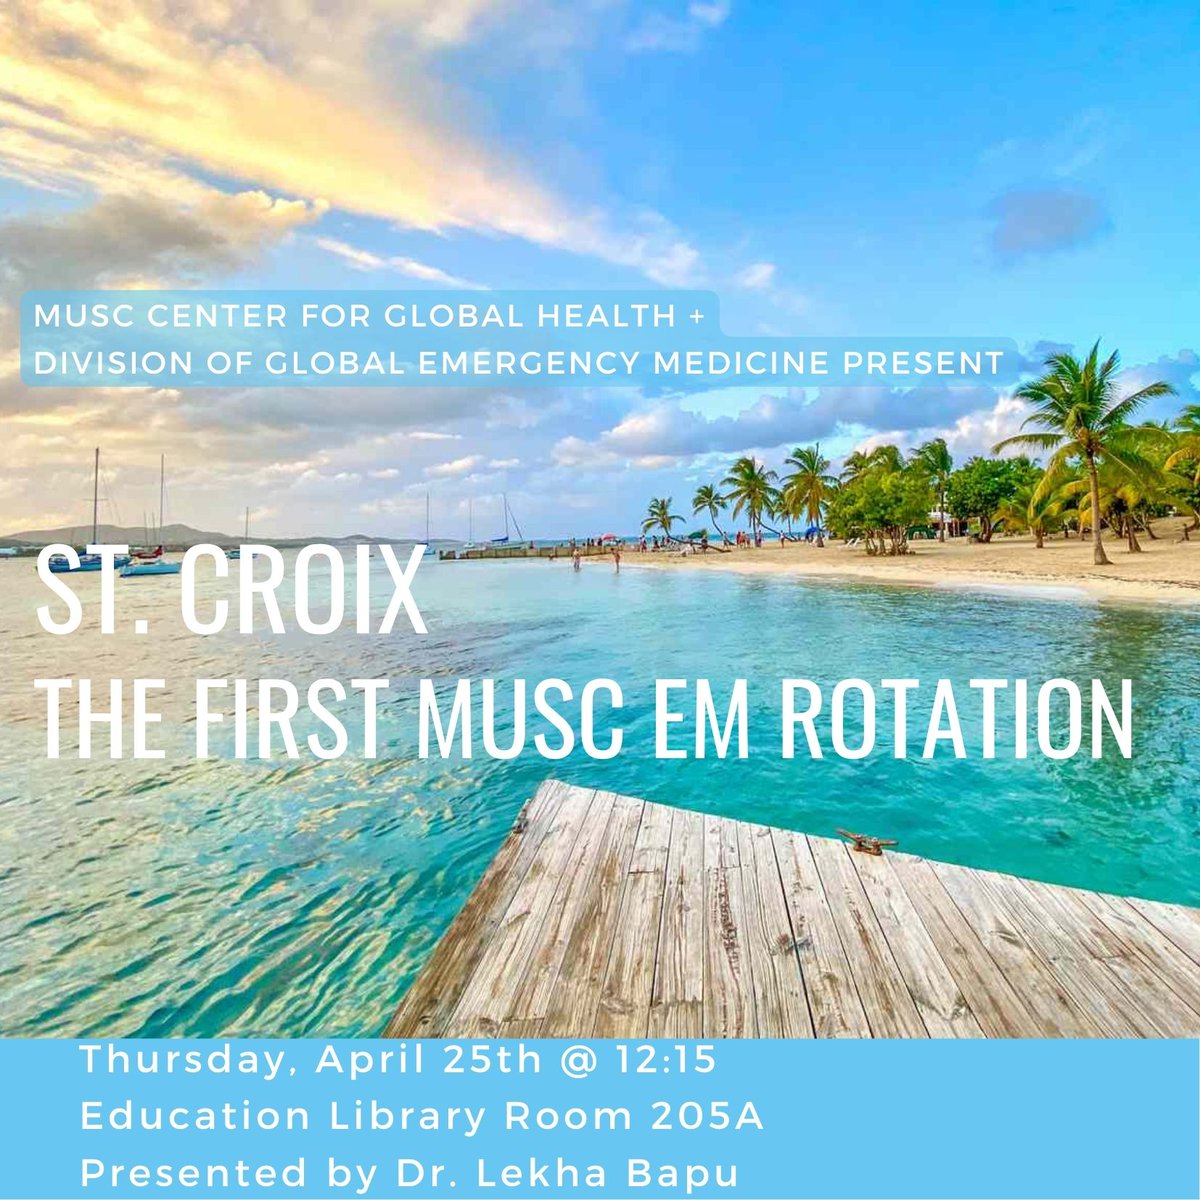 Join us tomorrow for lunch to see a presentation from travel grant recipient, Dr. Lekha Bapu, who will be sharing her recent experience of completing an emergency medicine rotation in St. Croix. Join us virtually, please email global-health@musc.edu for a link to view.